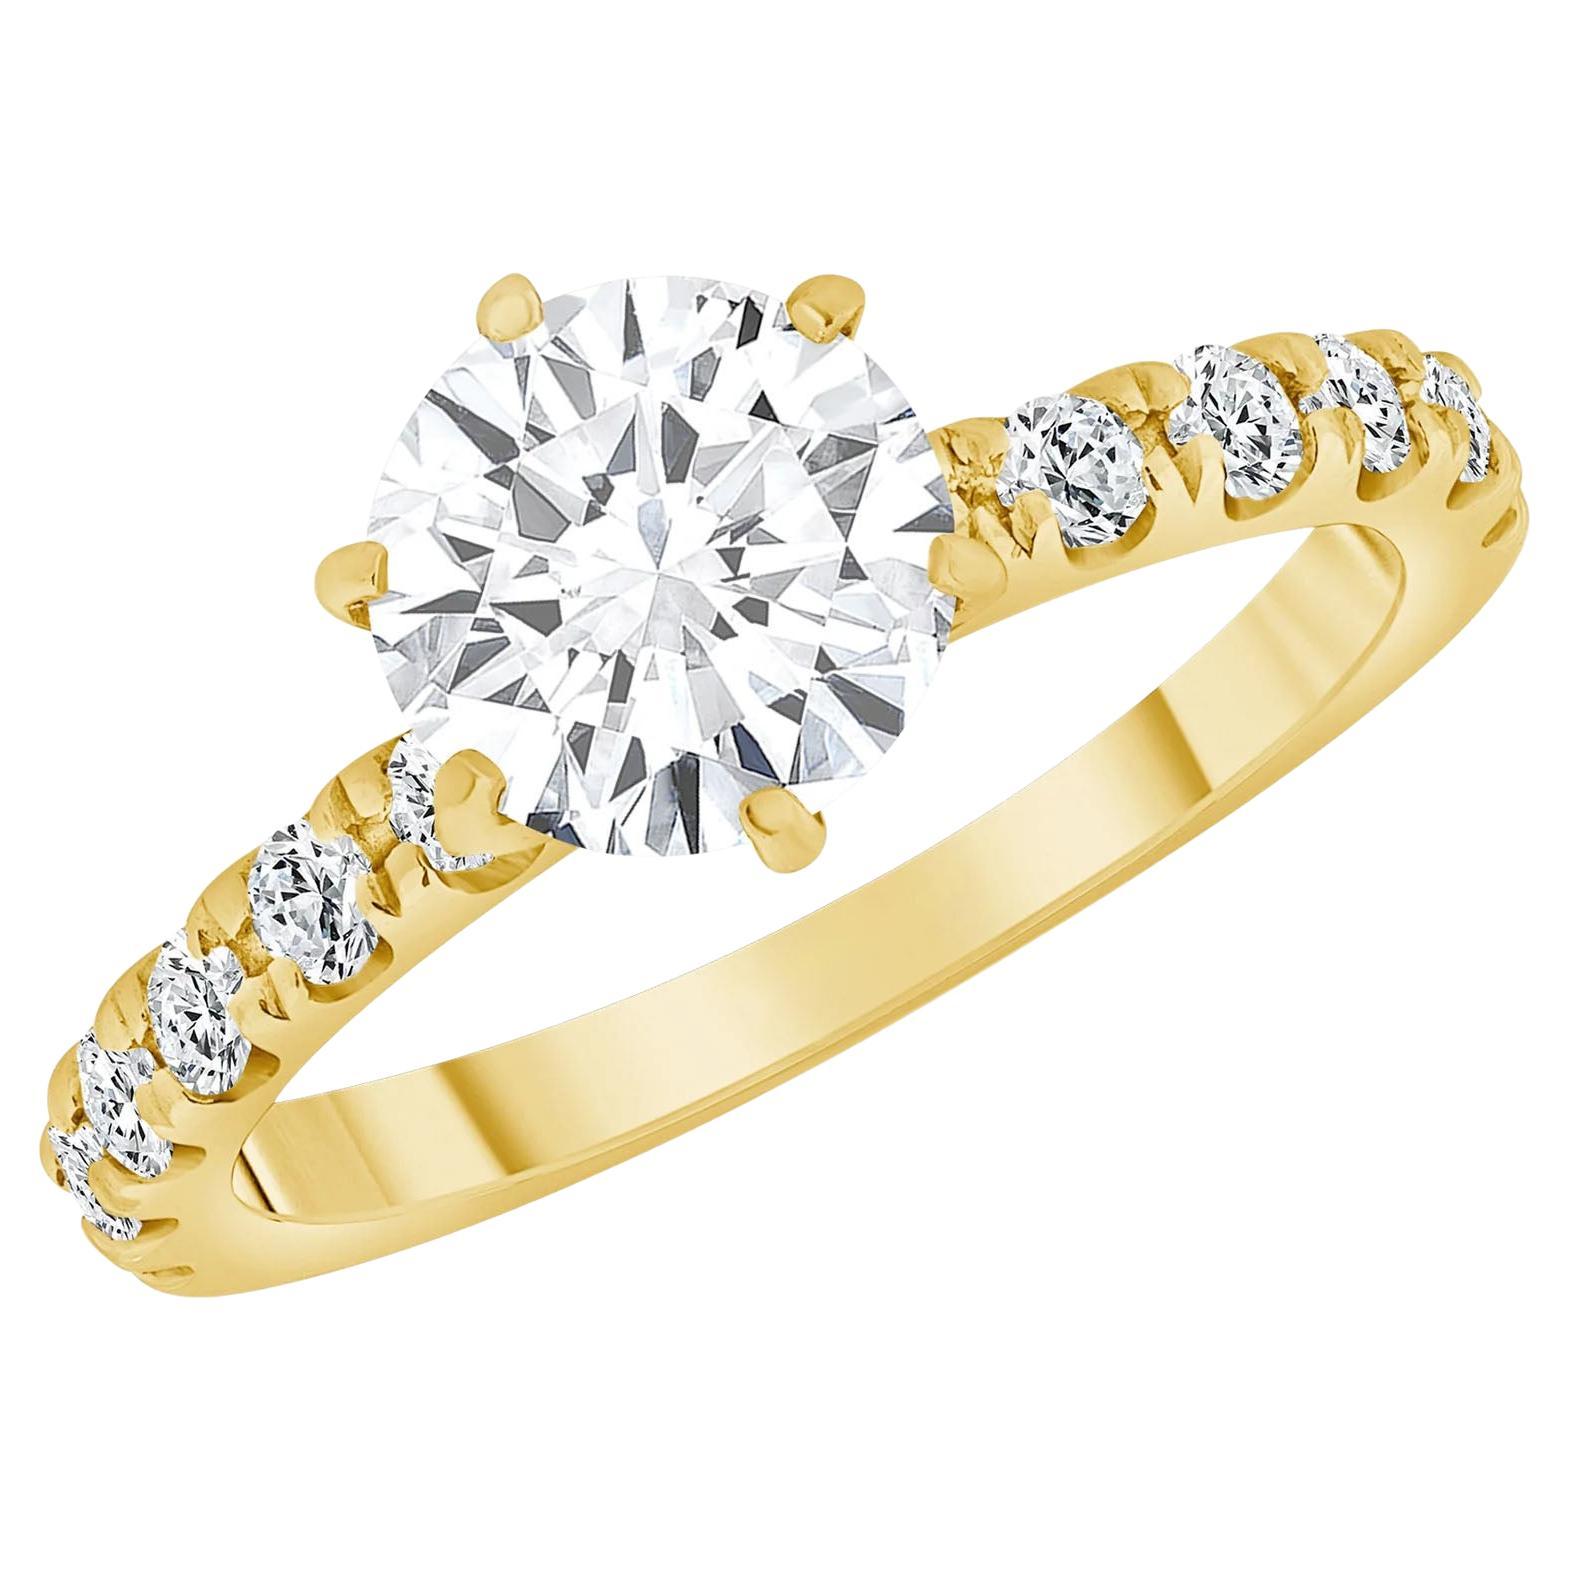 For Sale:  Rylie's Solitaire Engagement Ring 6-prong Half-eternity